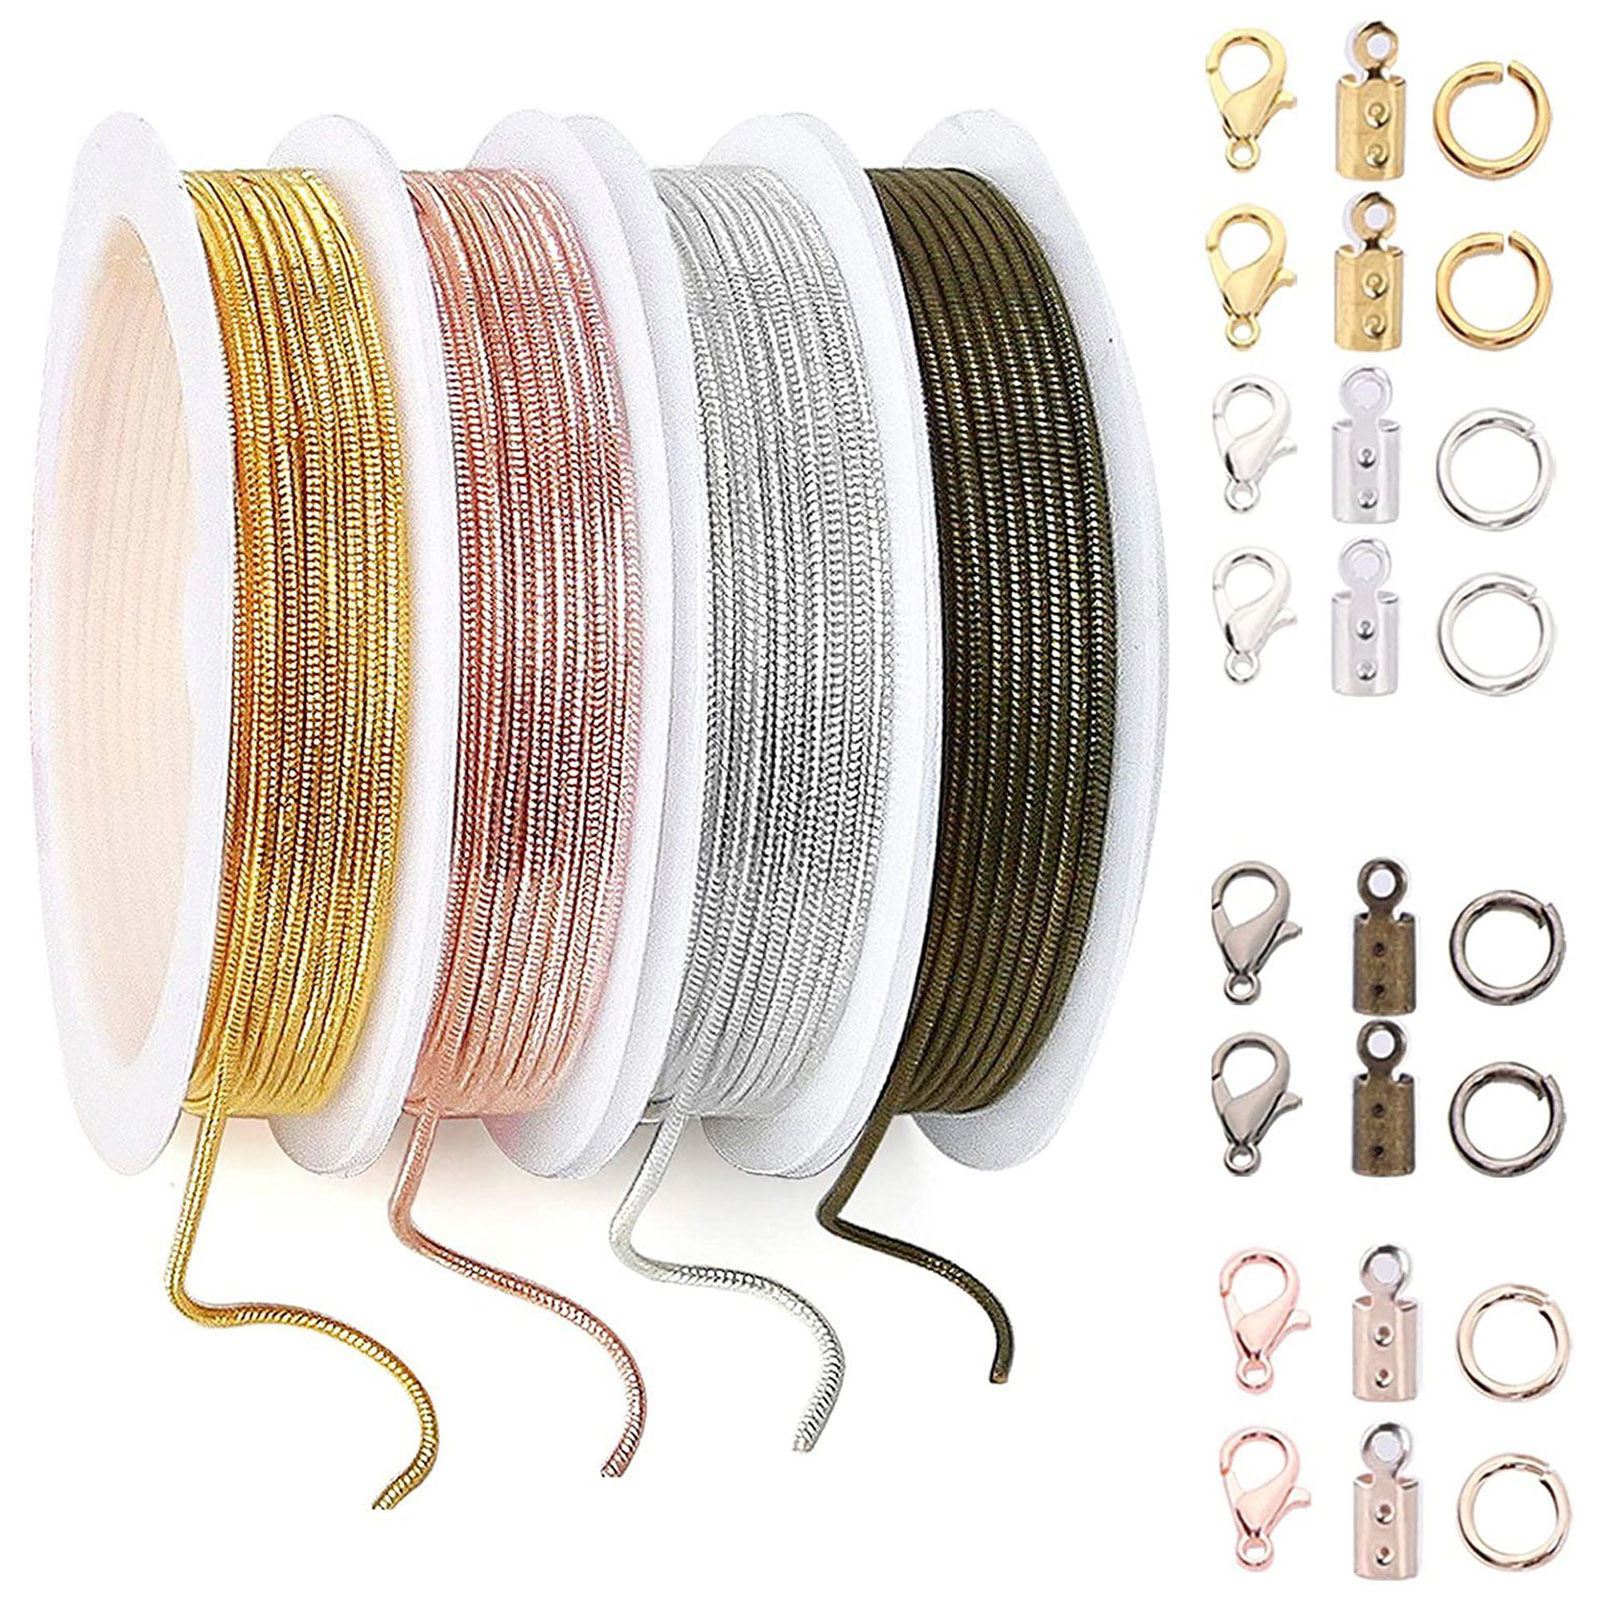 Picture of Copper Jewelry Accessories Findings Chain Jump Ring Lobster Clasp Cord Ends Multicolor 1 Set